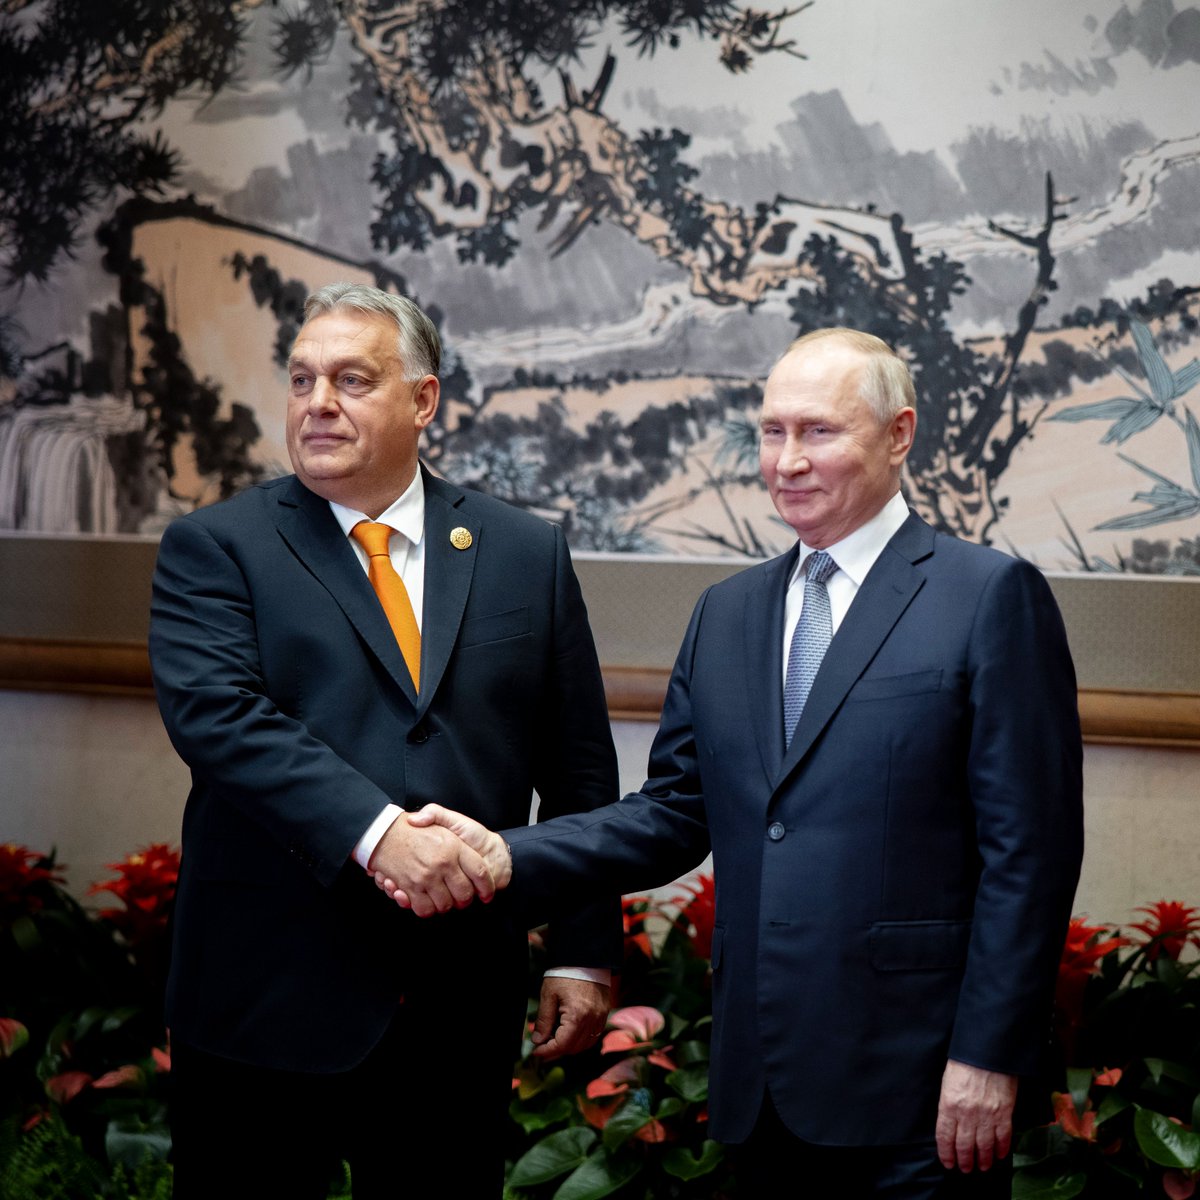 @PM_ViktorOrban held bilateral talks with Russian President Putin in Beijing. The two leaders discussed Hungarian-Russian cooperation in the fields of gas and oil supplies and nuclear energy. During the meeting, PM Orbán stressed the importance of peace. He said that it was crucial for the whole continent, including Hungary, that the flood of refugees, sanctions and fighting should end